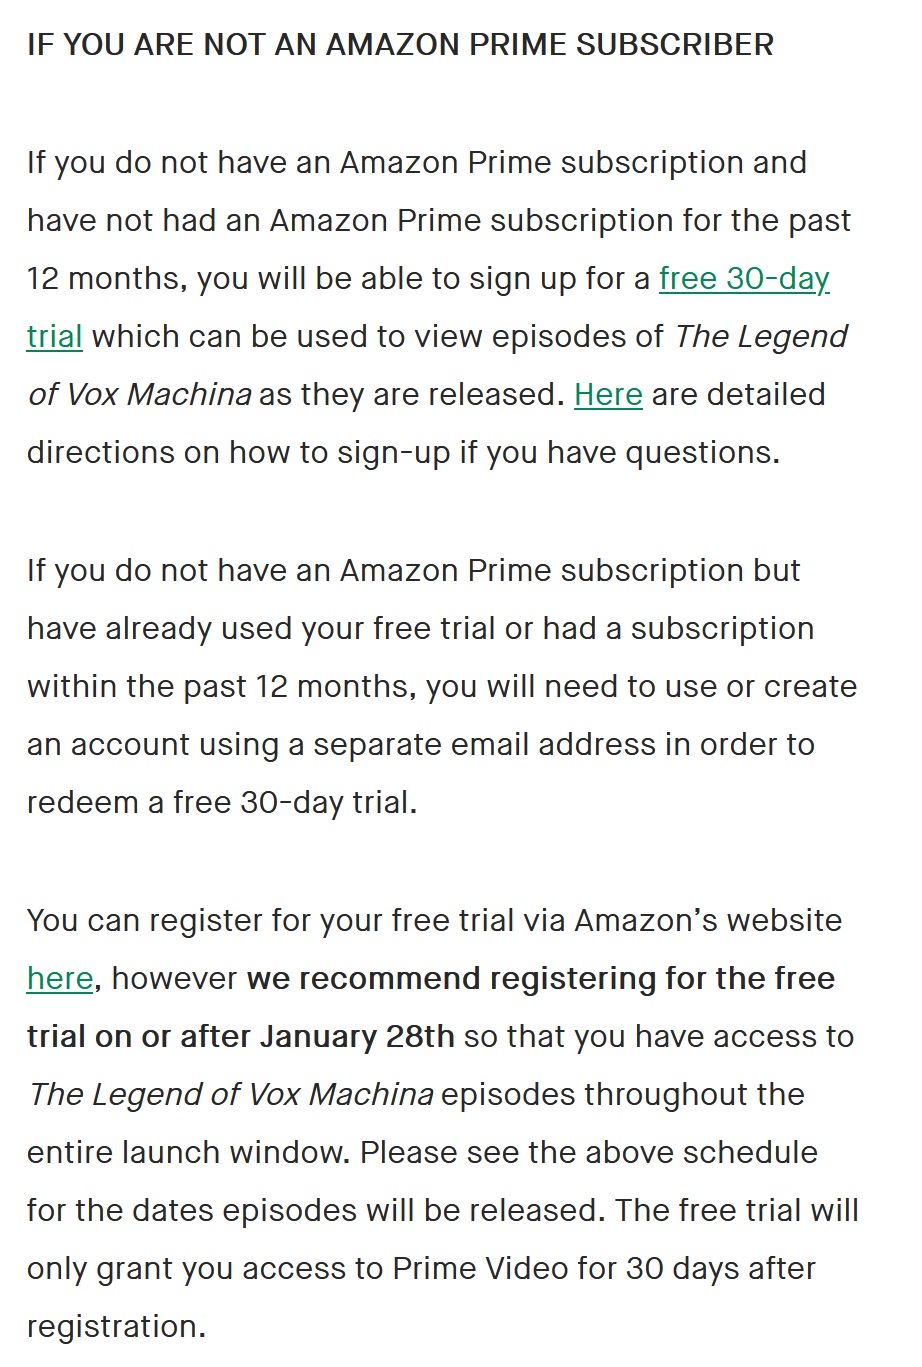 IF YOU ARE ALREADY AN AMAZON PRIME or TWITCH PRIME SUBSCRIBER You will have access to episodes of The Legend of Vox Machina as they release with no additional steps. IF YOU ARE NOT AN AMAZON PRIME SUBSCRIBER If you do not have an Amazon Prime subscription and have not had an Amazon Prime subscription for the past 12 months, you will be able to sign up for a free 30-day trial which can be used to view episodes of The Legend of Vox Machina as they are released. Here are detailed directions on how to sign-up if you have questions. If you do not have an Amazon Prime subscription but have already used your free trial or had a subscription within the past 12 months, you will need to use or create an account using a separate email address in order to redeem a free 30-day trial. You can register for your free trial via Amazon’s website here, however we recommend registering for the free trial on or after January 28th so that you have access to The Legend of Vox Machina episodes throughout the entire launch window. Please see the above schedule for the dates episodes will be released. The free trial will only grant you access to Prime Video for 30 days after registration.